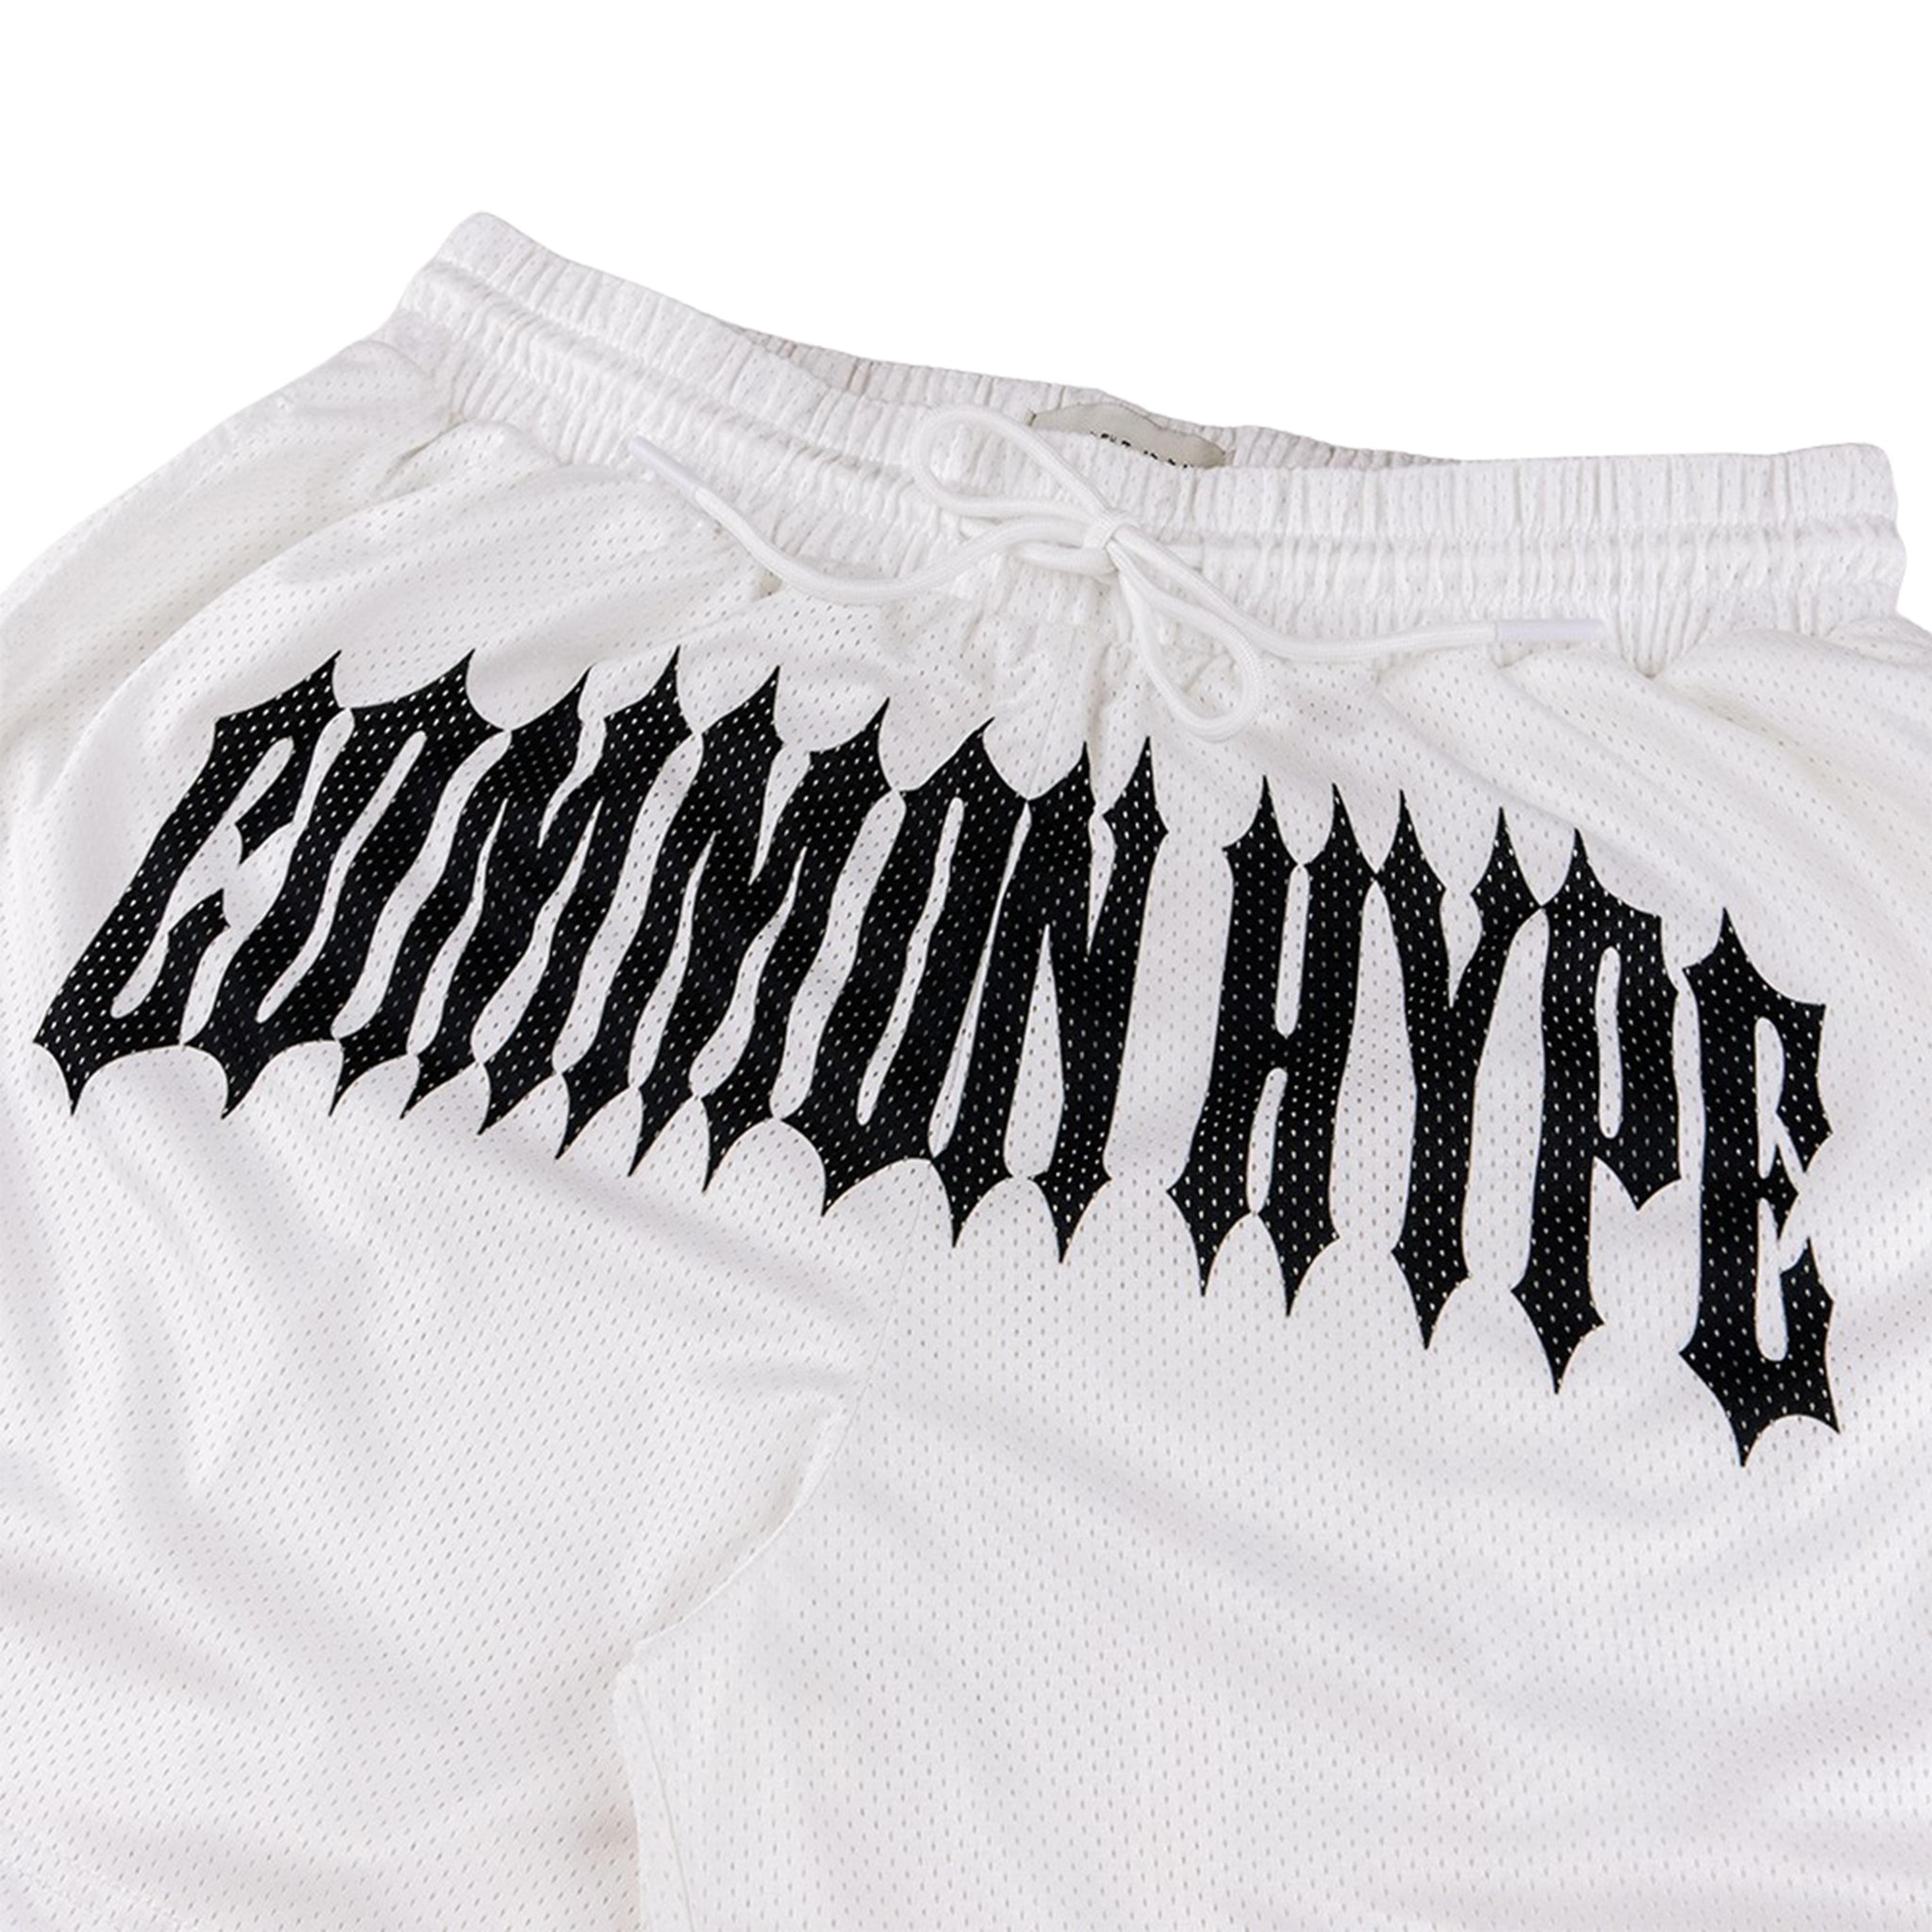 Alternate View 1 of Common Hype White Old English Shorts